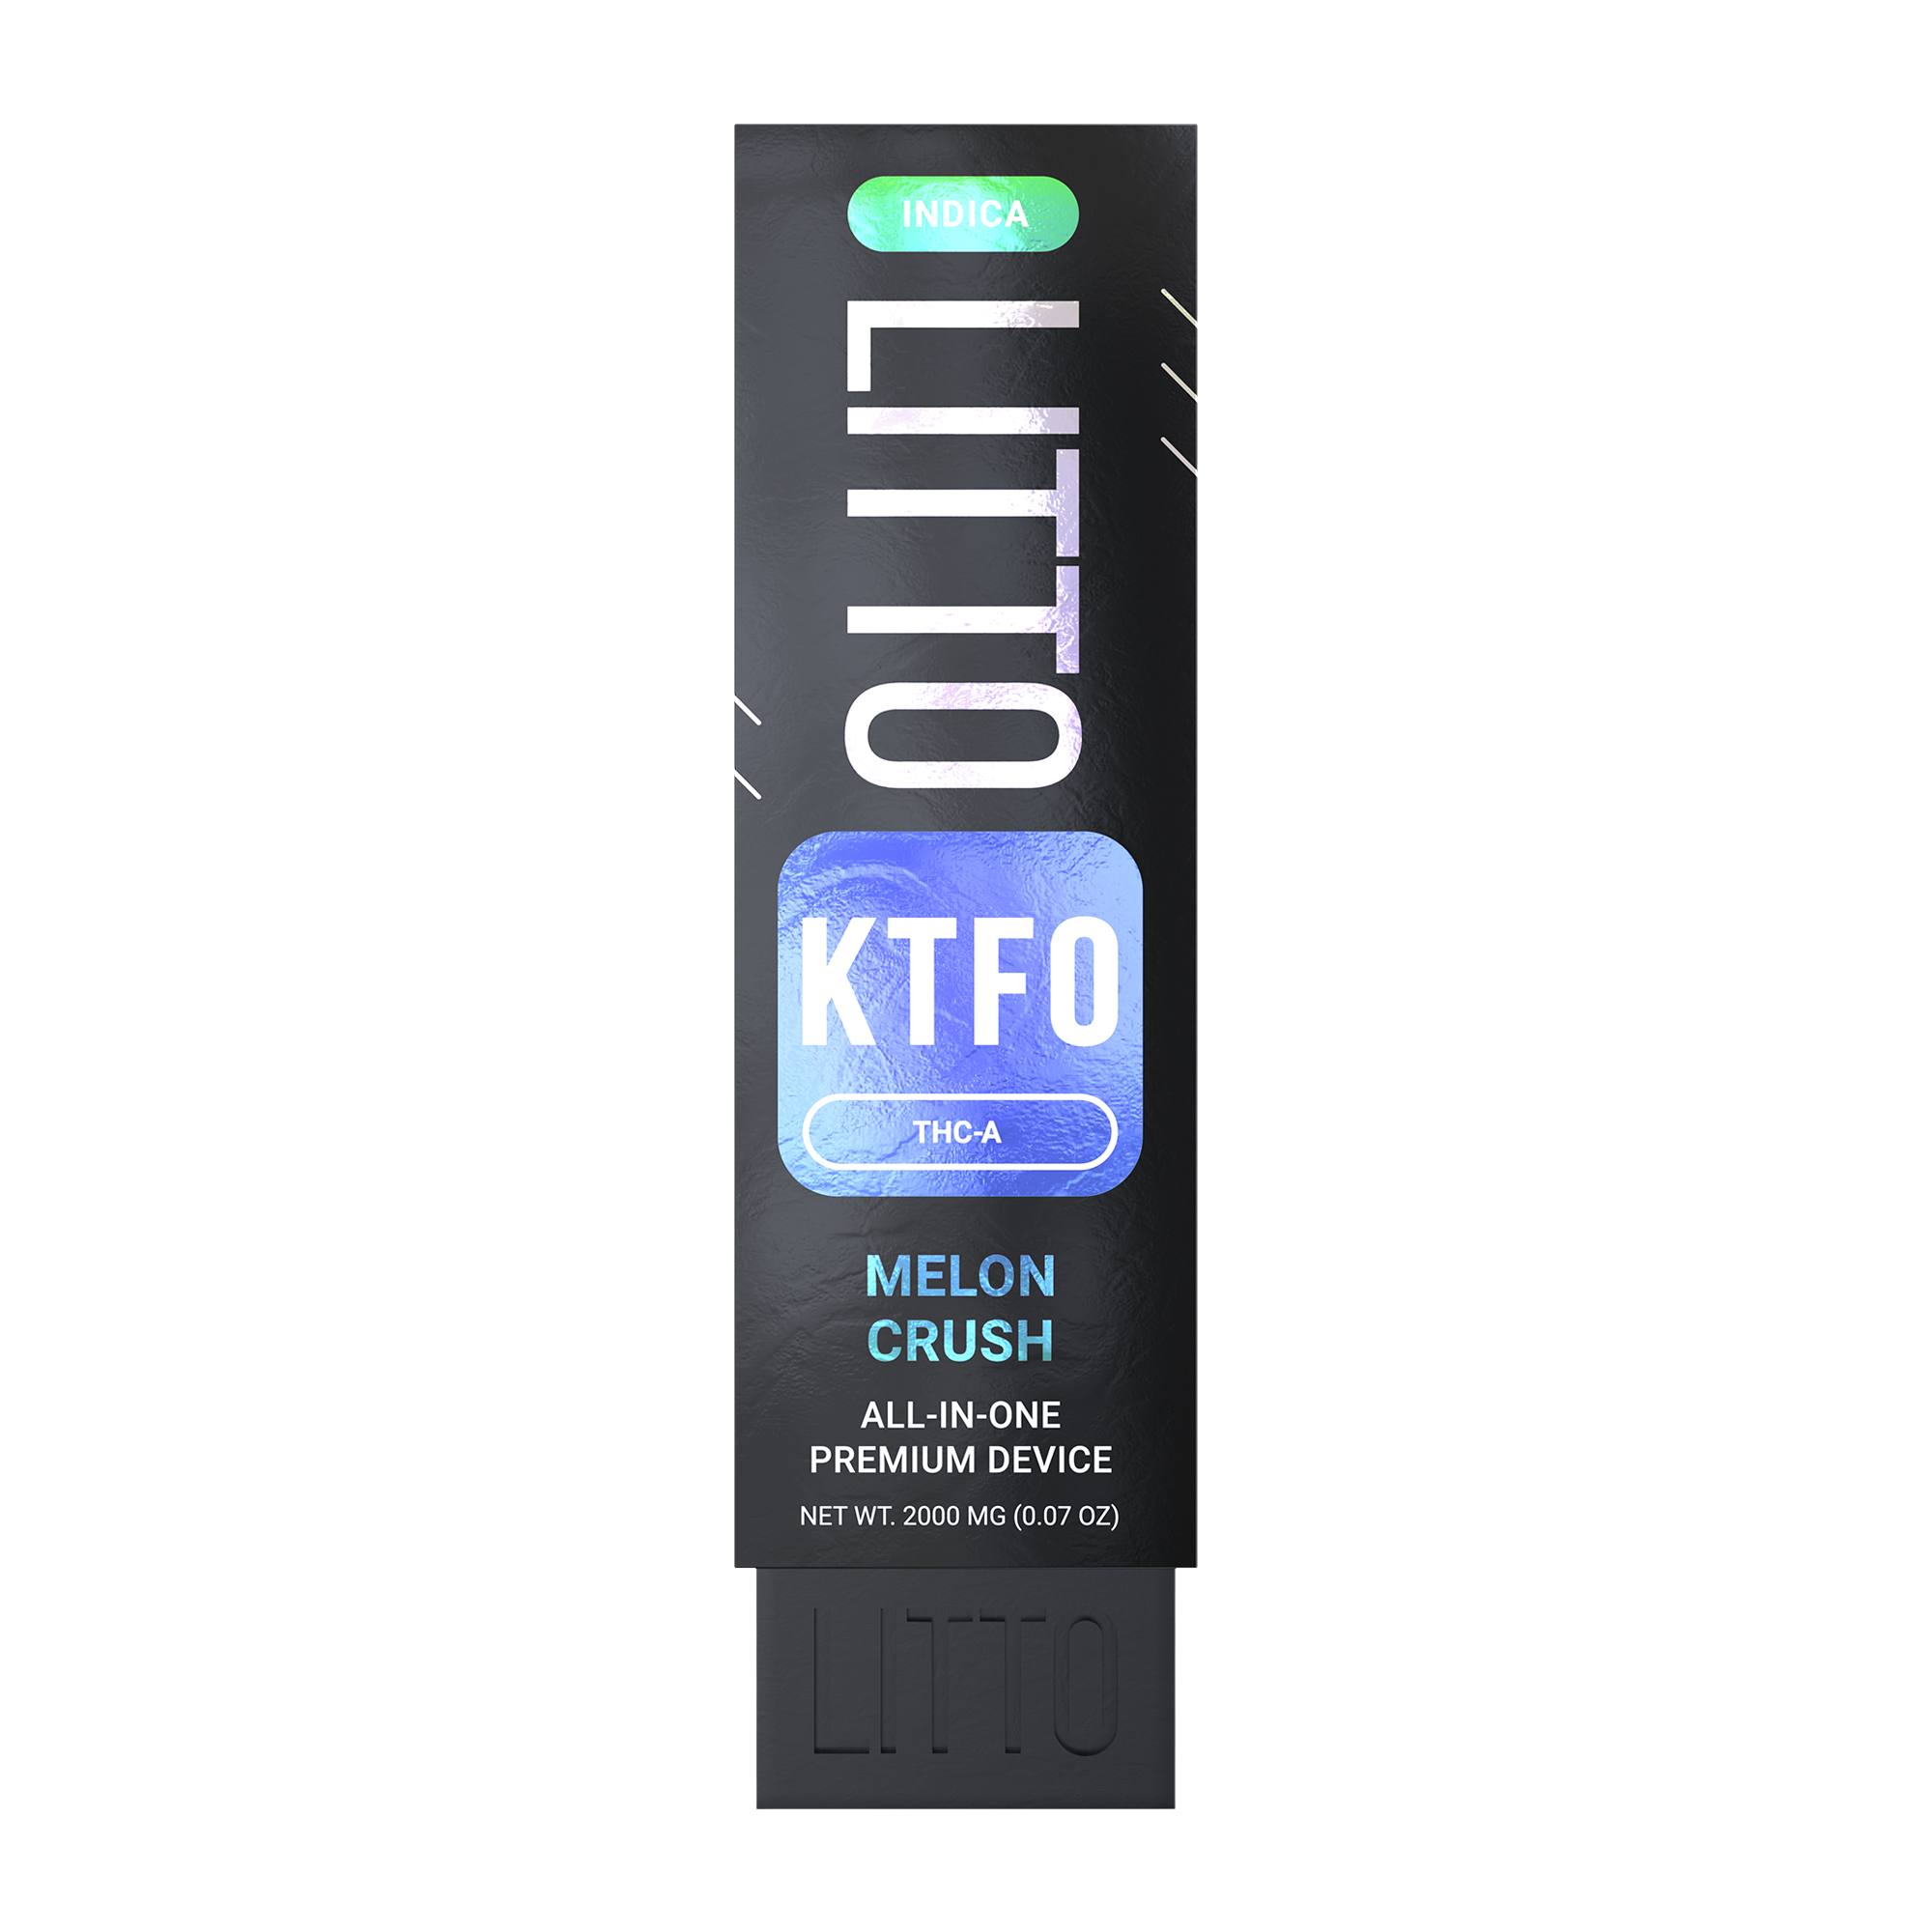 All-in-One Device - KTFO - Indica - THCA - Melon Crush - 2G